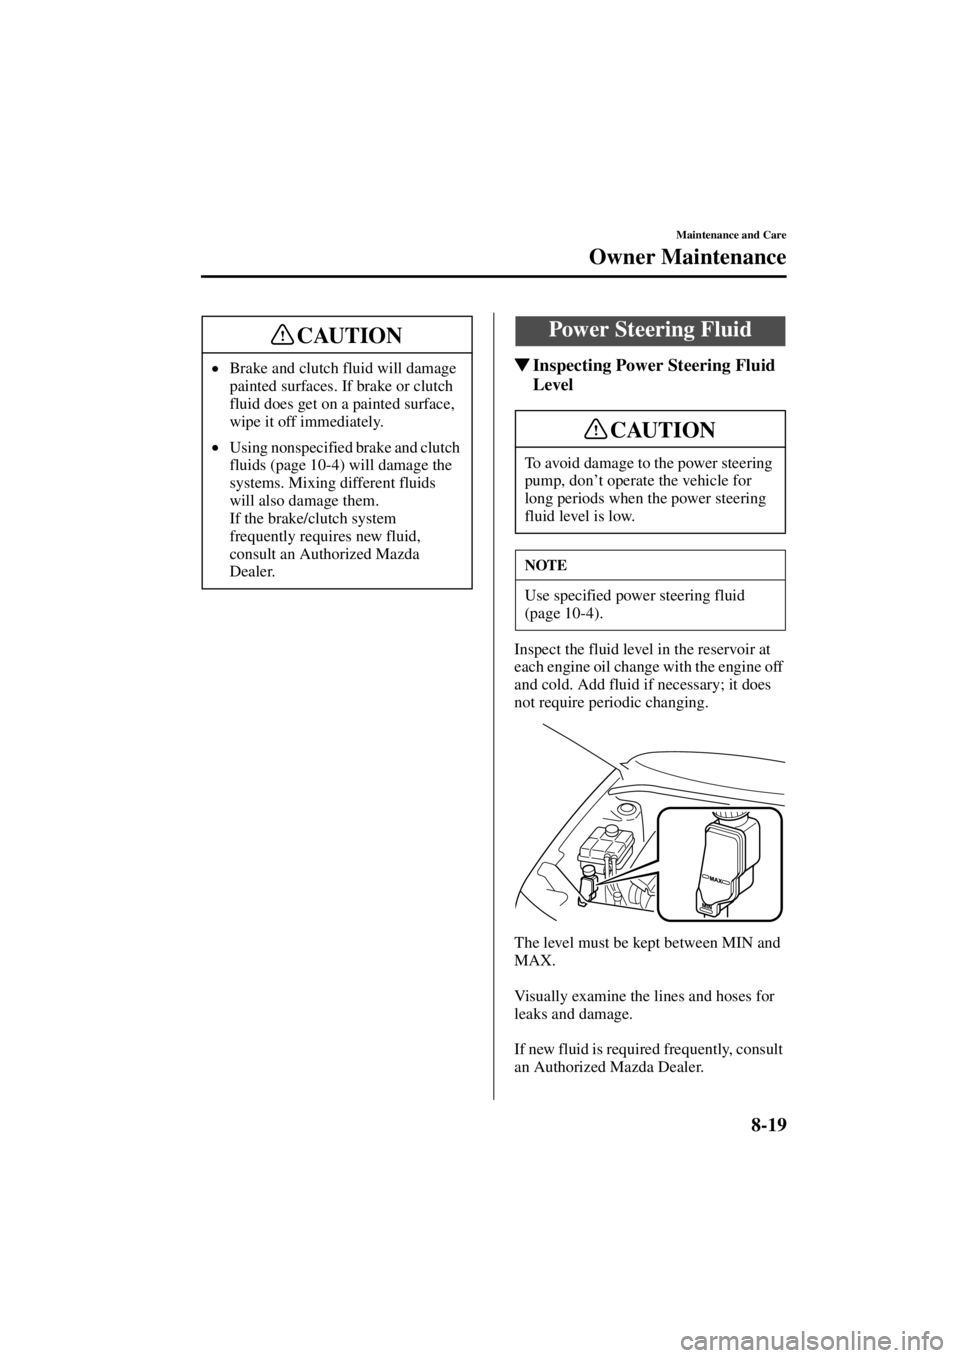 MAZDA MODEL 3 4-DOOR 2004  Owners Manual 8-19
Maintenance and Care
Owner Maintenance
Form No. 8S18-EA-03I
Inspecting Power Steering Fluid 
Level
Inspect the fluid level in the reservoir at 
each engine oil change with the engine off 
and co